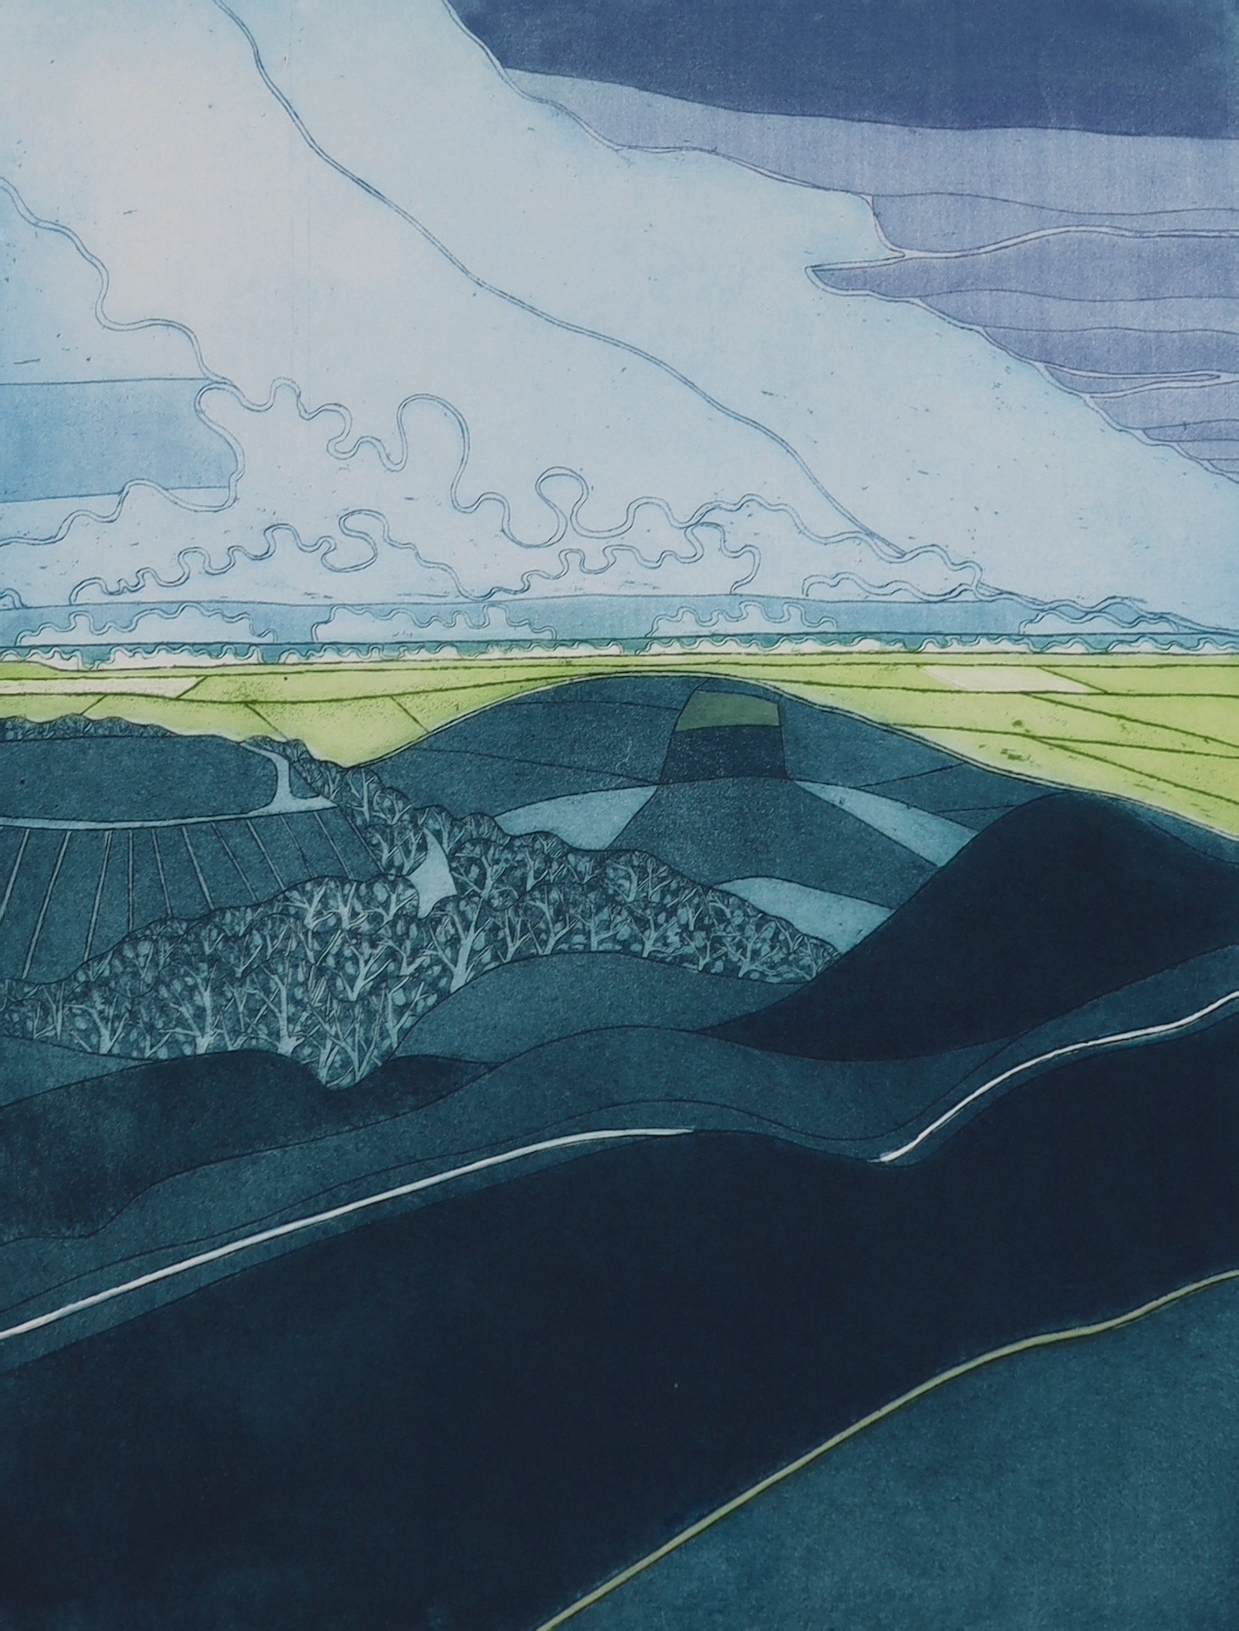 John Brunsden (1933-2014) two colour etchings, comprising Off Chesil Beach and Severn Valley, limited edition 60/150 and 68/100, each signed in pencil, one with blindstamp, largest 80 x 60cm